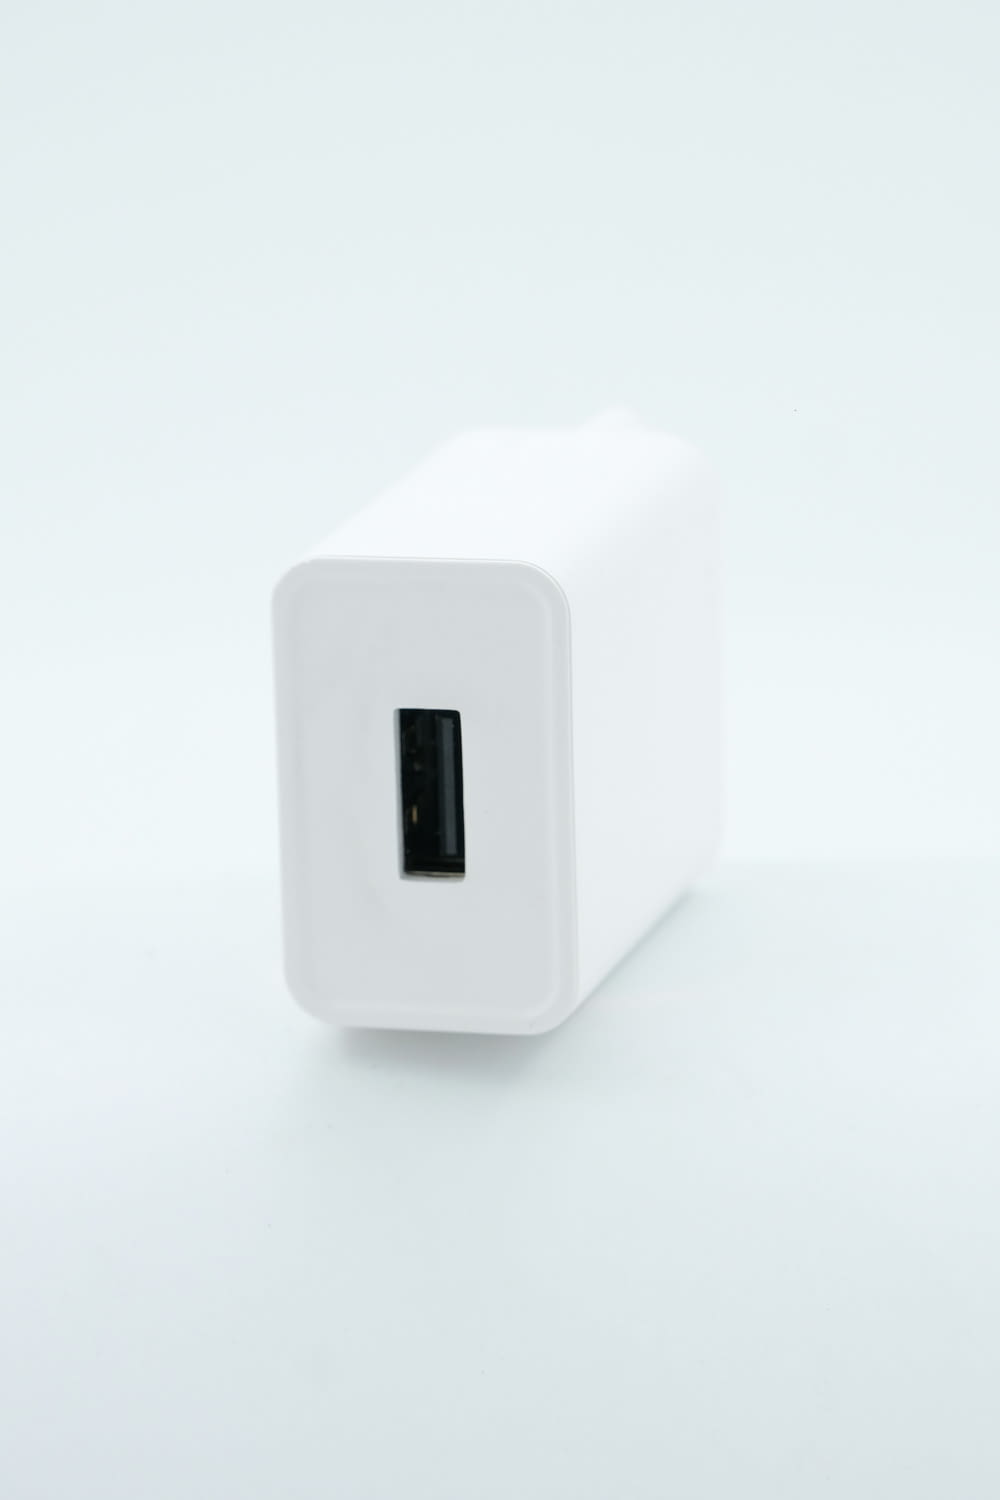 a white square object on a white surface